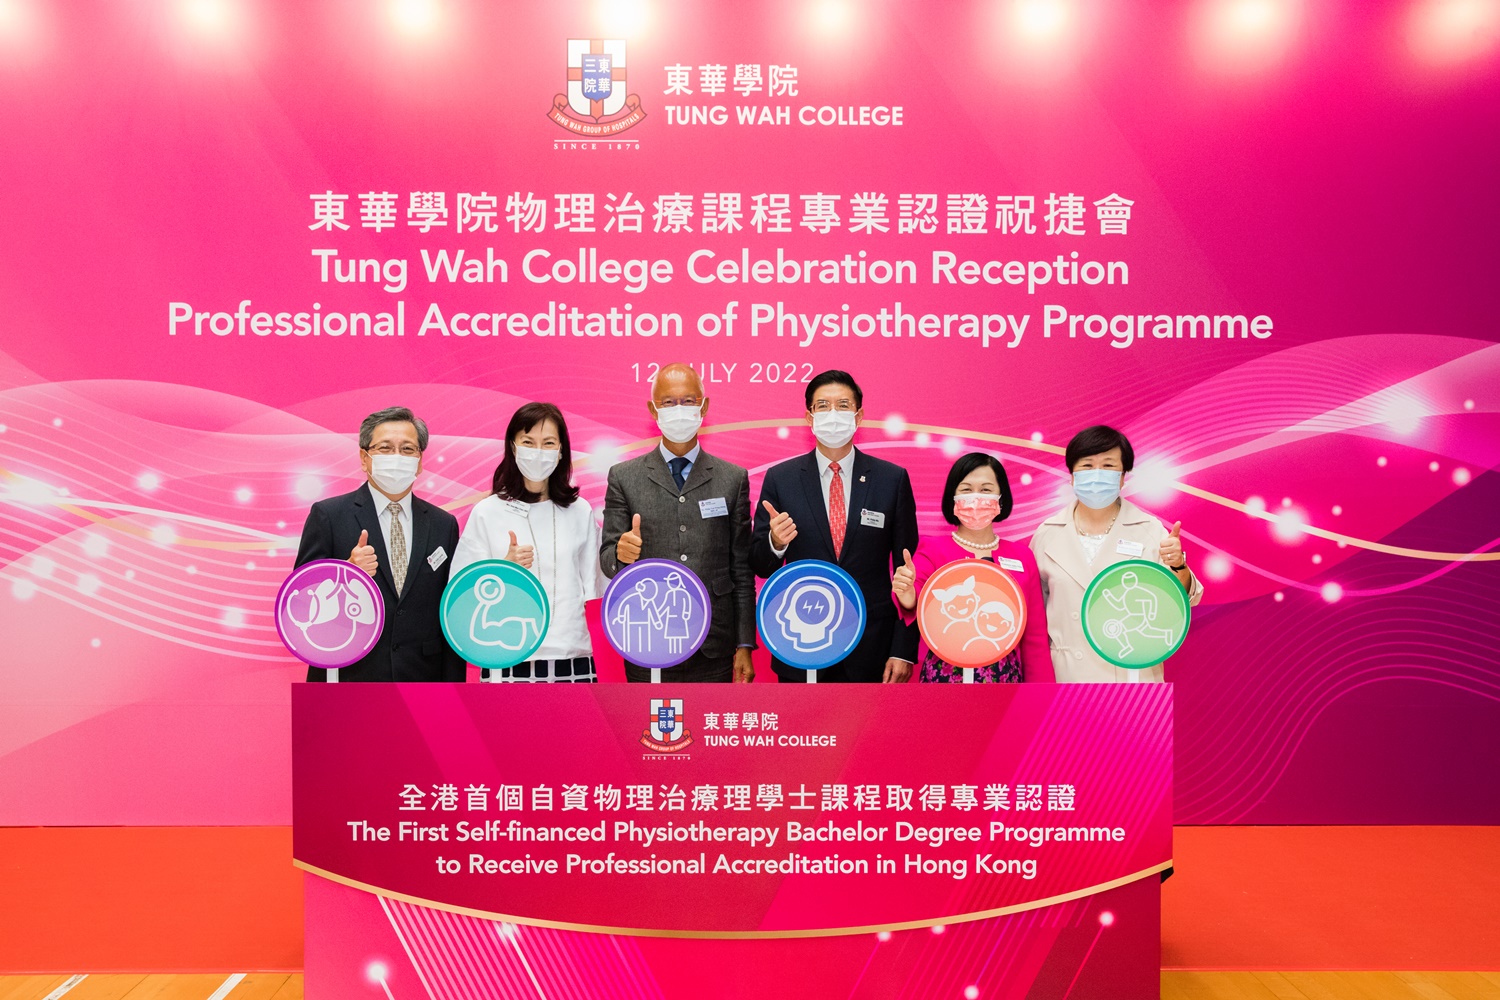 Tung Wah College Celebration Reception on Professional Accreditation of Physiotherapy Programme